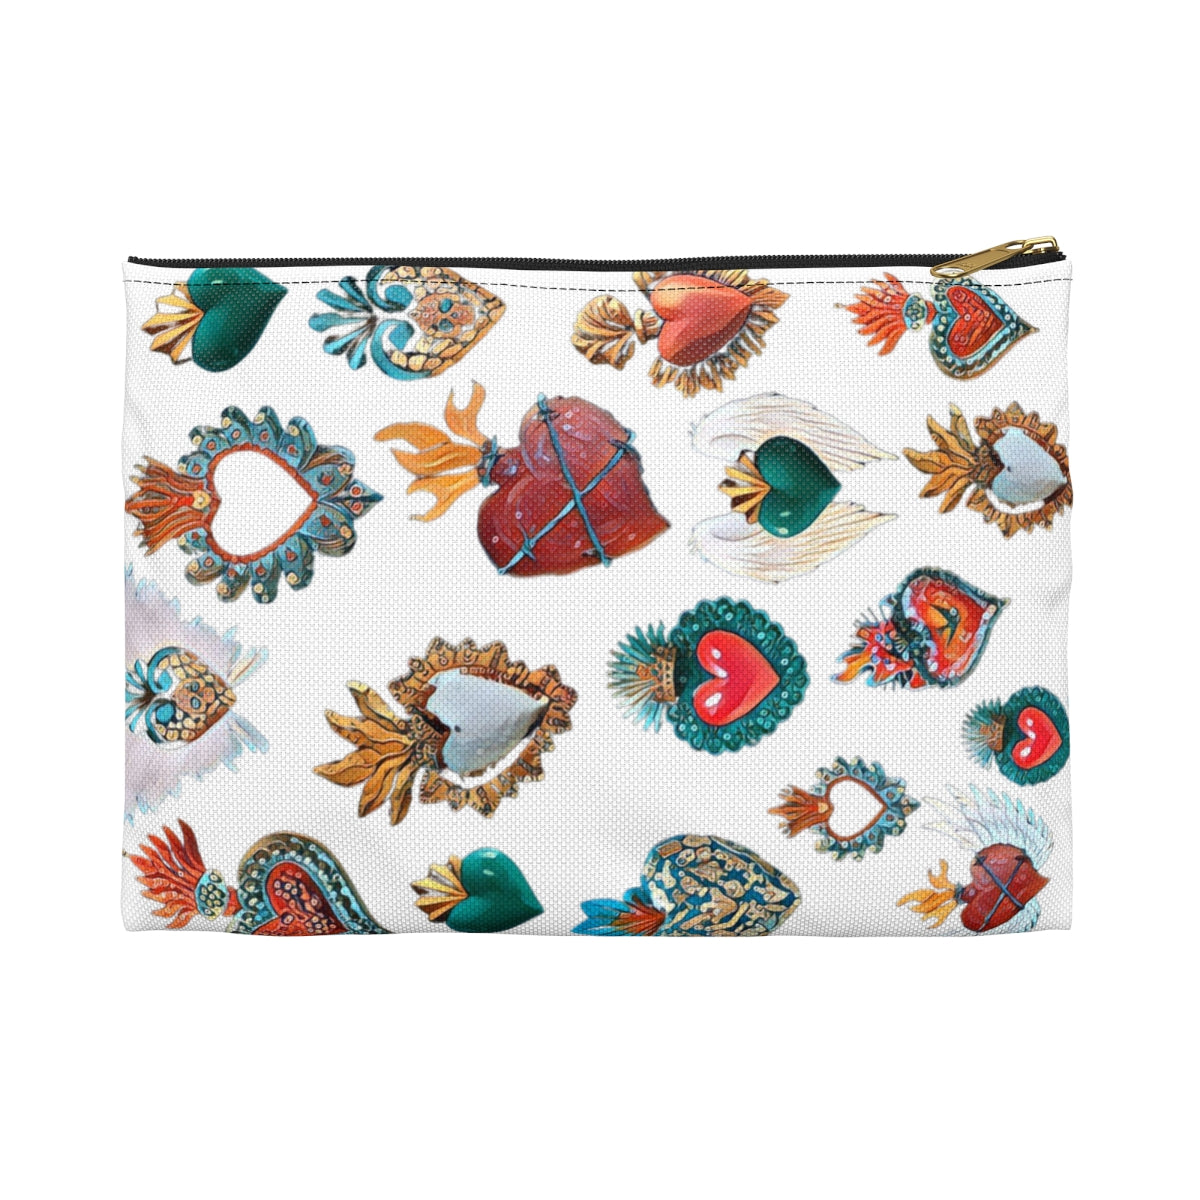 San Miguel My Heart Accessory Coin Pouch